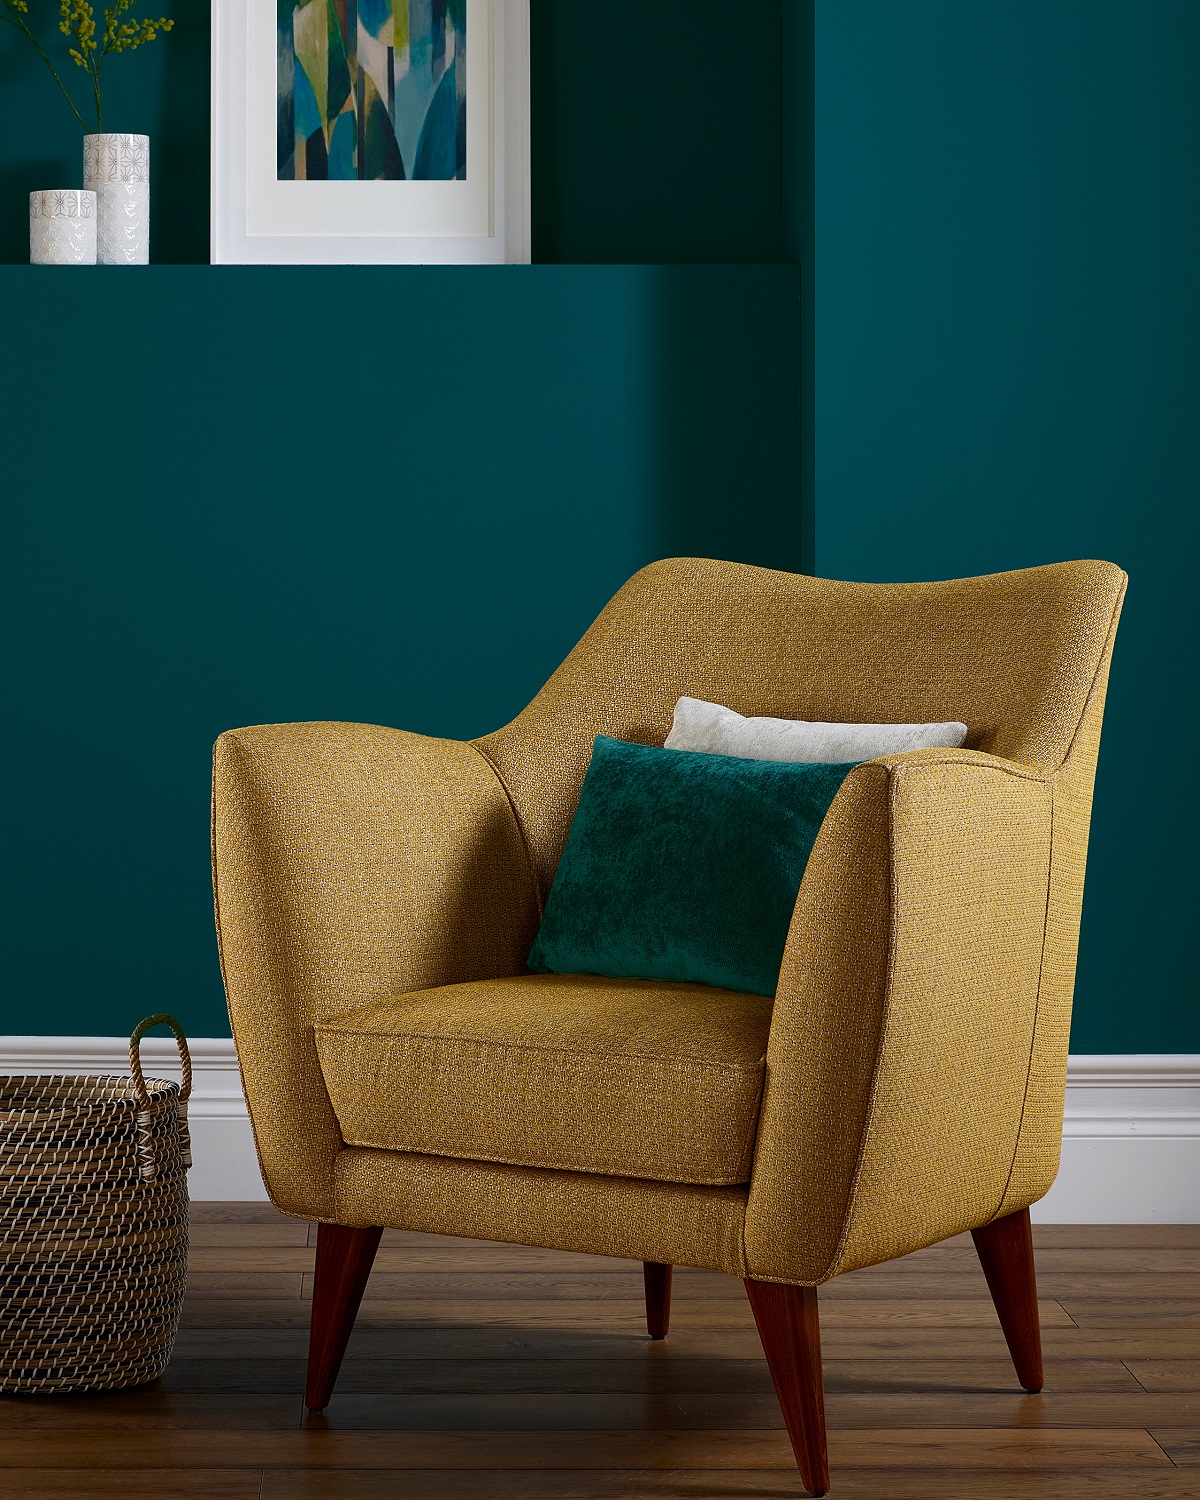 upholstered chair in Odisha by Sekers against teal blue wall